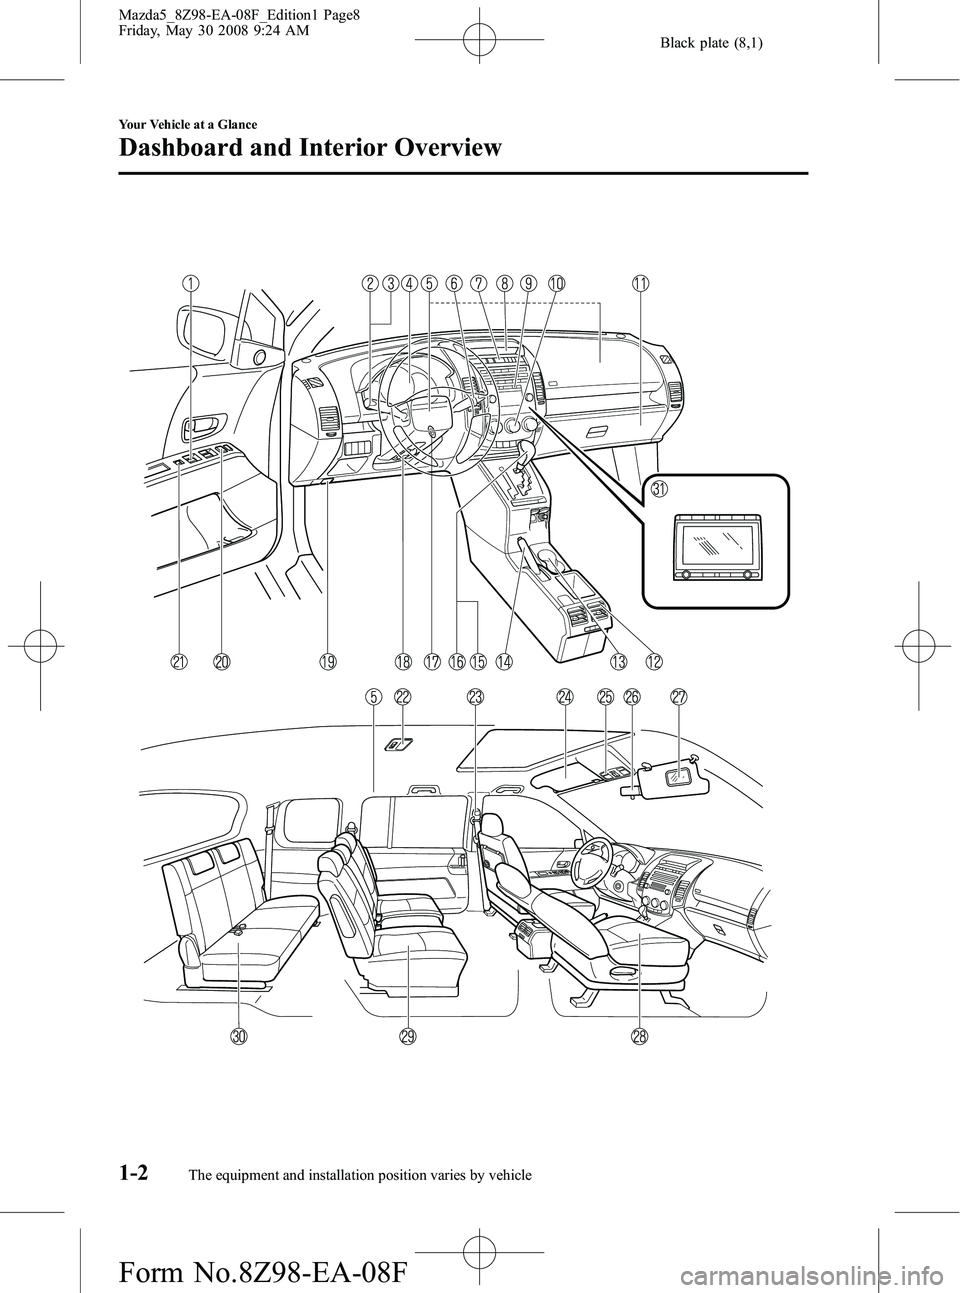 MAZDA MODEL 5 2009  Owners Manual Black plate (8,1)
1-2
Your Vehicle at a Glance
The equipment and installation position varies by vehicle
Dashboard and Interior Overview
Mazda5_8Z98-EA-08F_Edition1 Page8
Friday, May 30 2008 9:24 AM
F